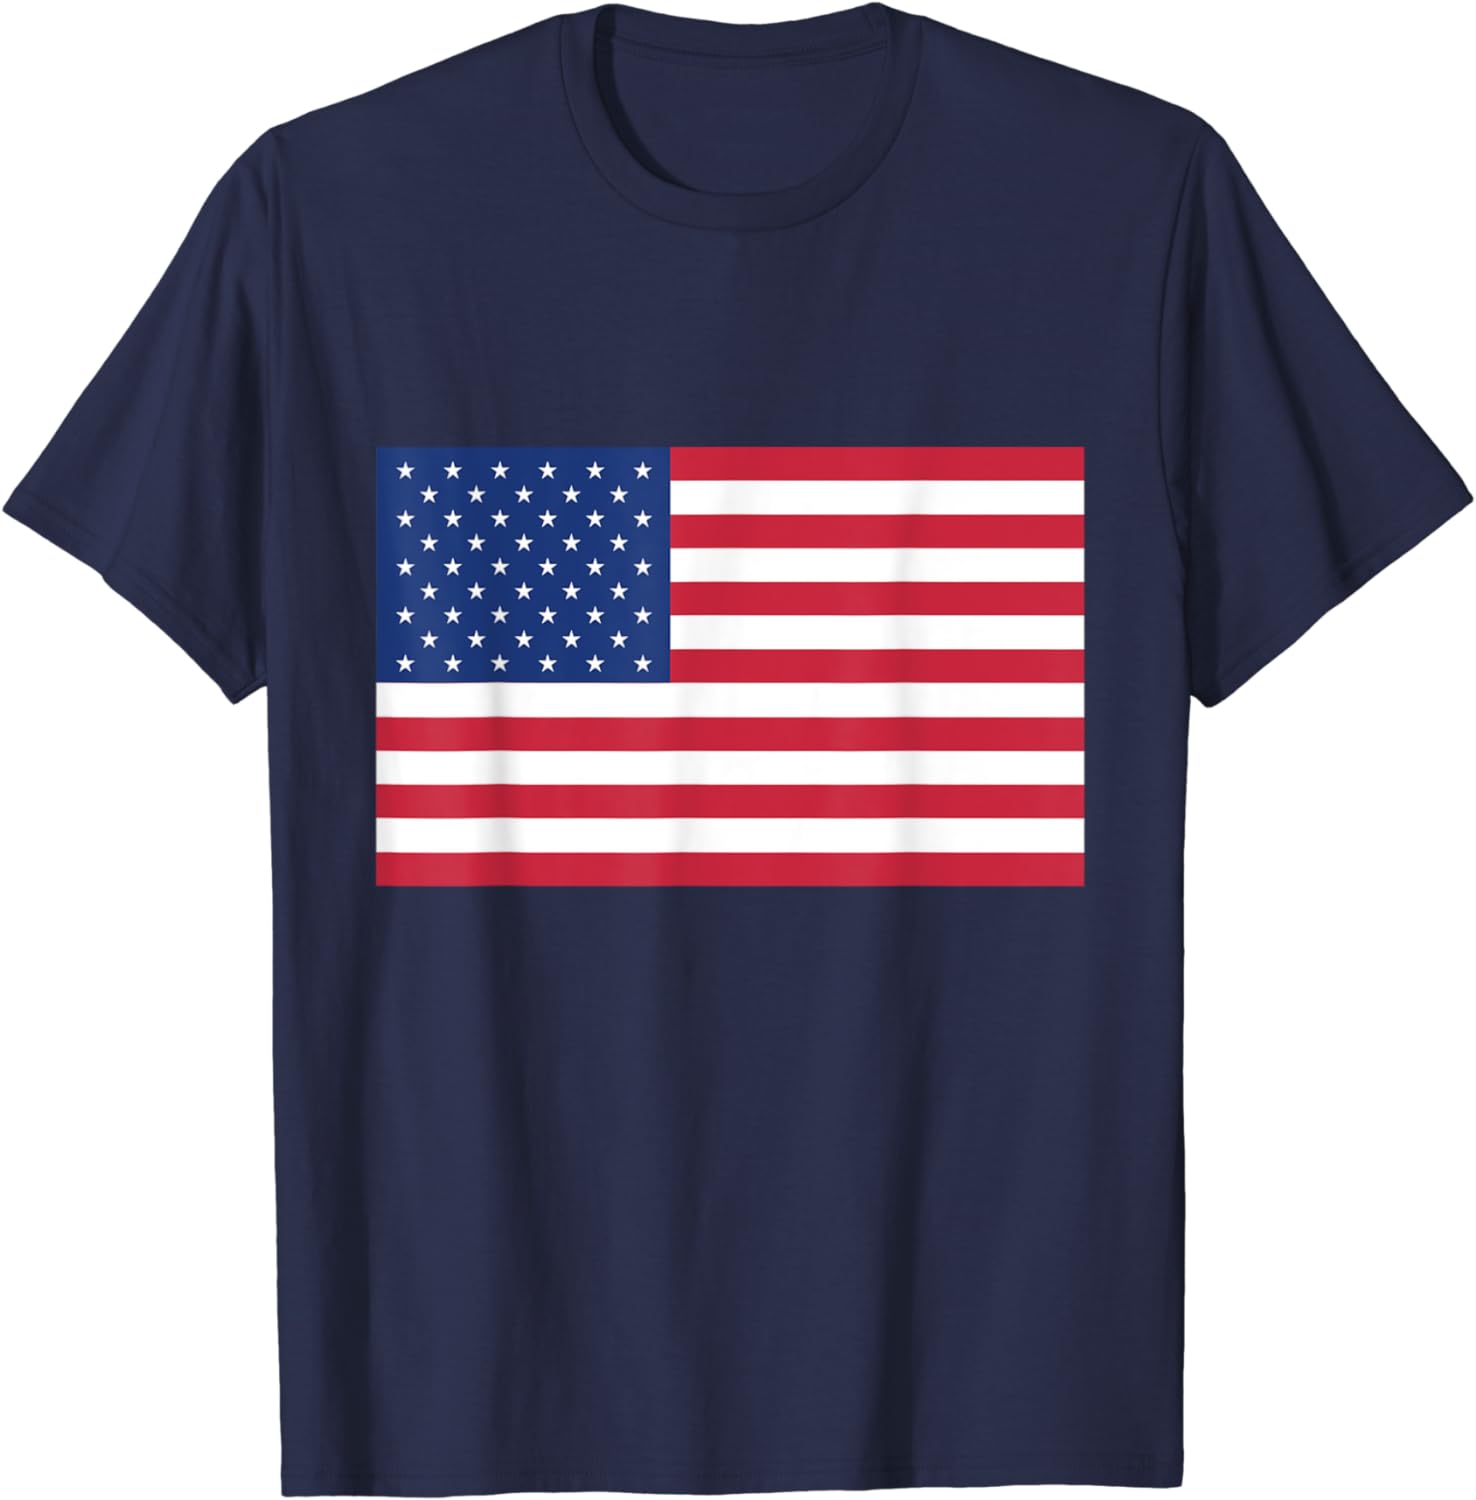 Express Your Allegiance: Patriotic T-Shirts and Apparel